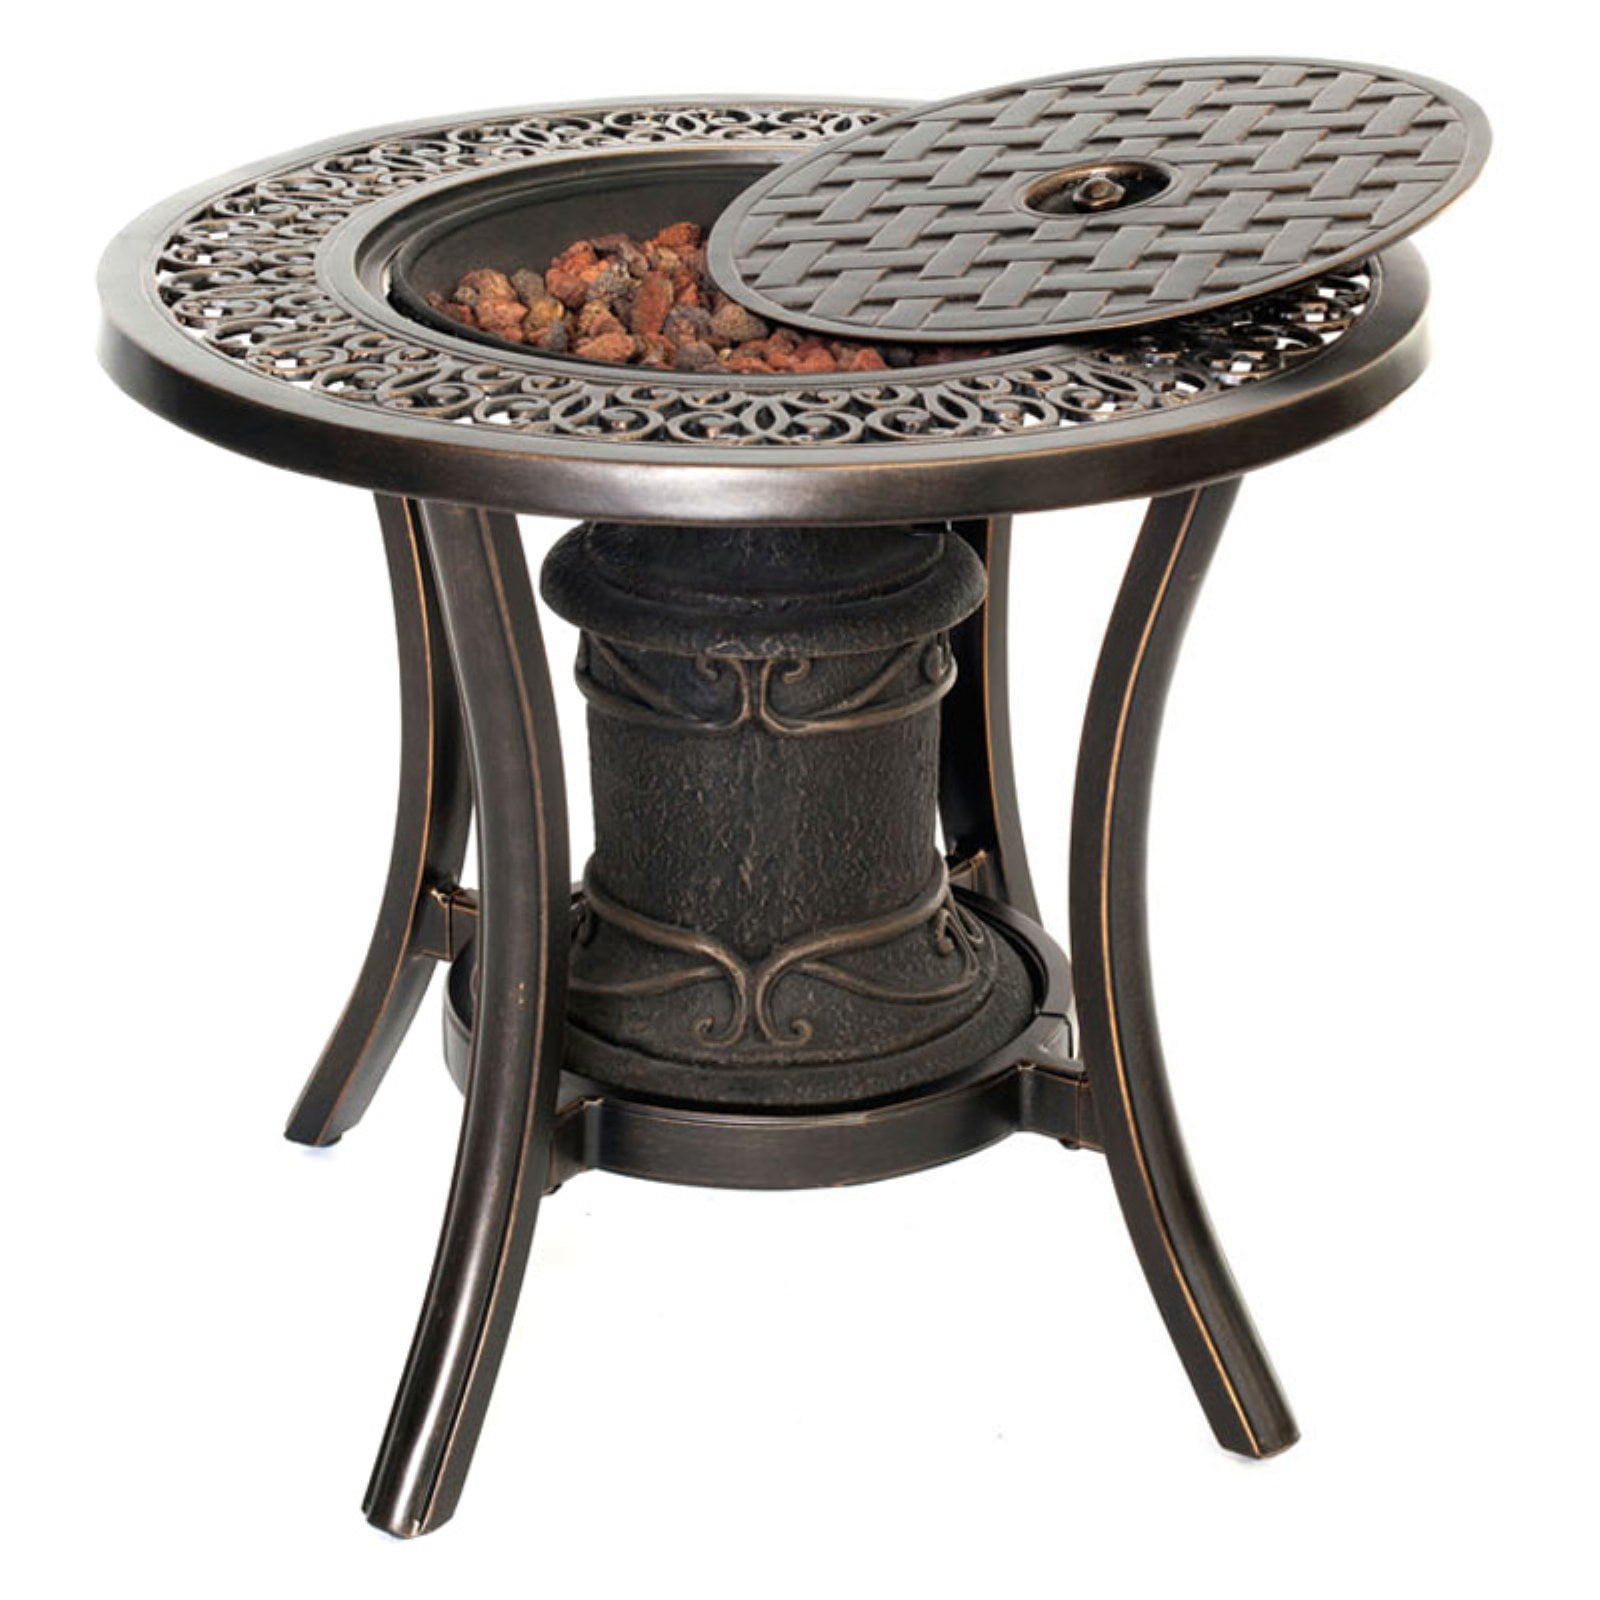 10 000 Btu Cast Top Fire Pit Side Table, Hanover Fire Pit Kit